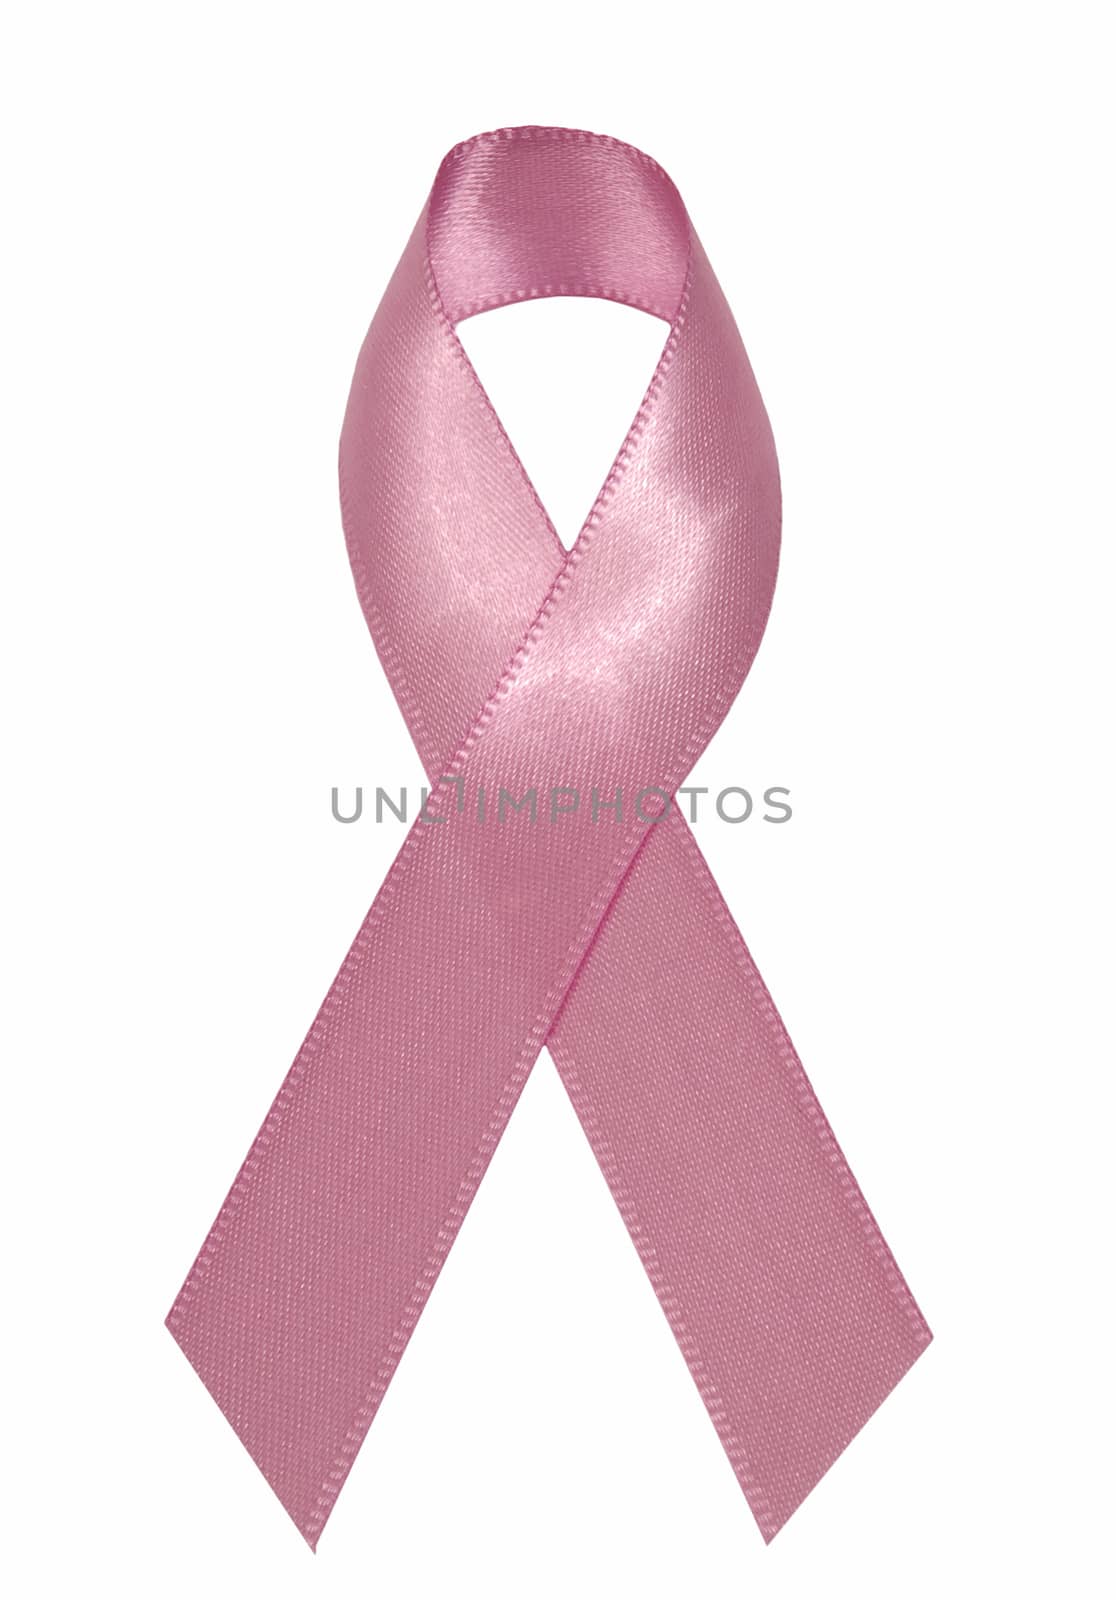 Close up shot of a pink breast cancer awareness ribbon on white background